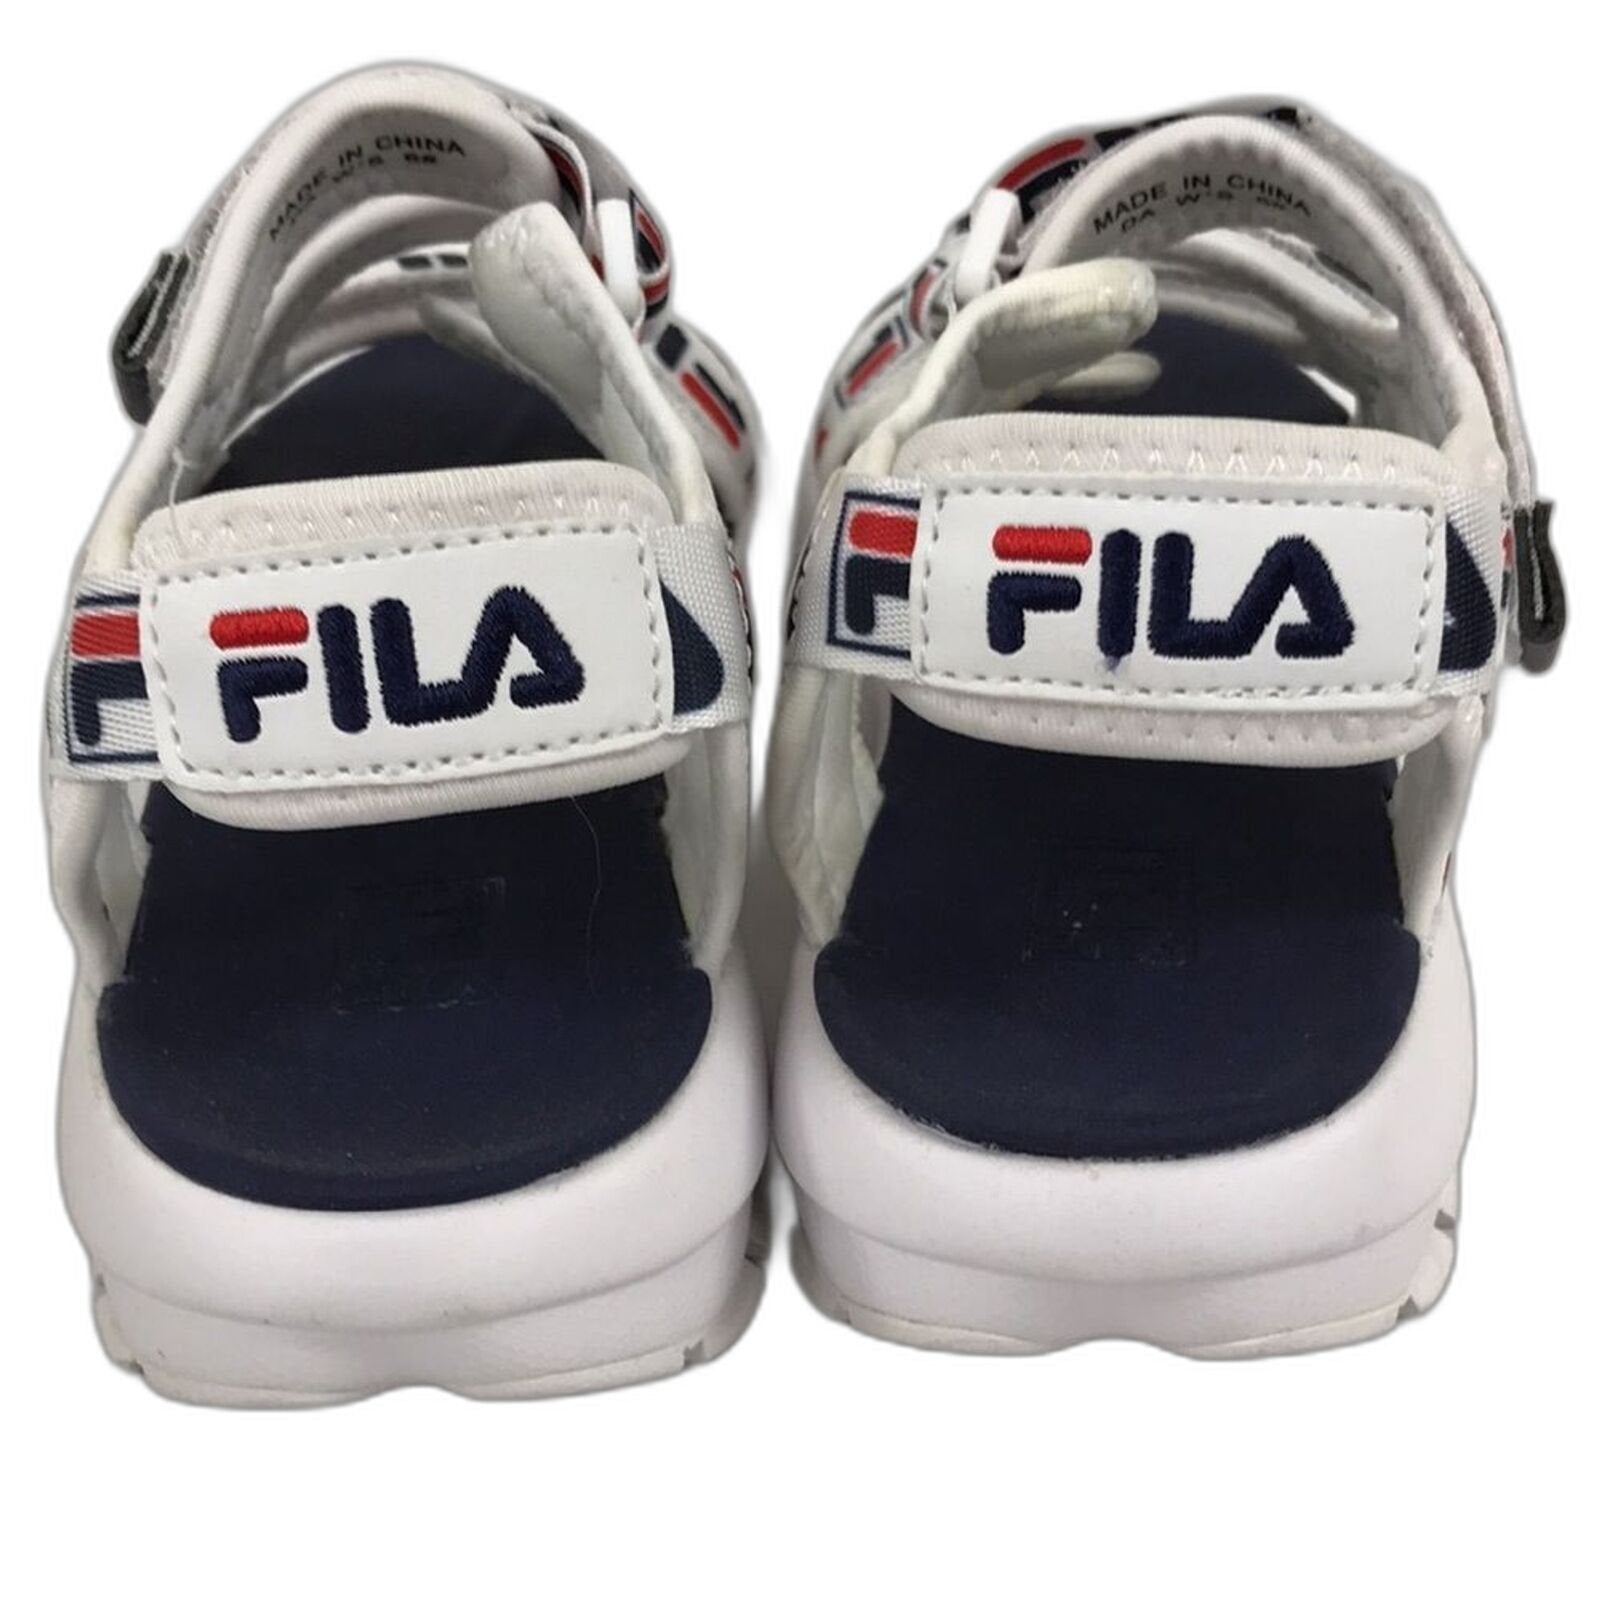 Fila Womens Disruptor Sandals White Navy Red 6 US